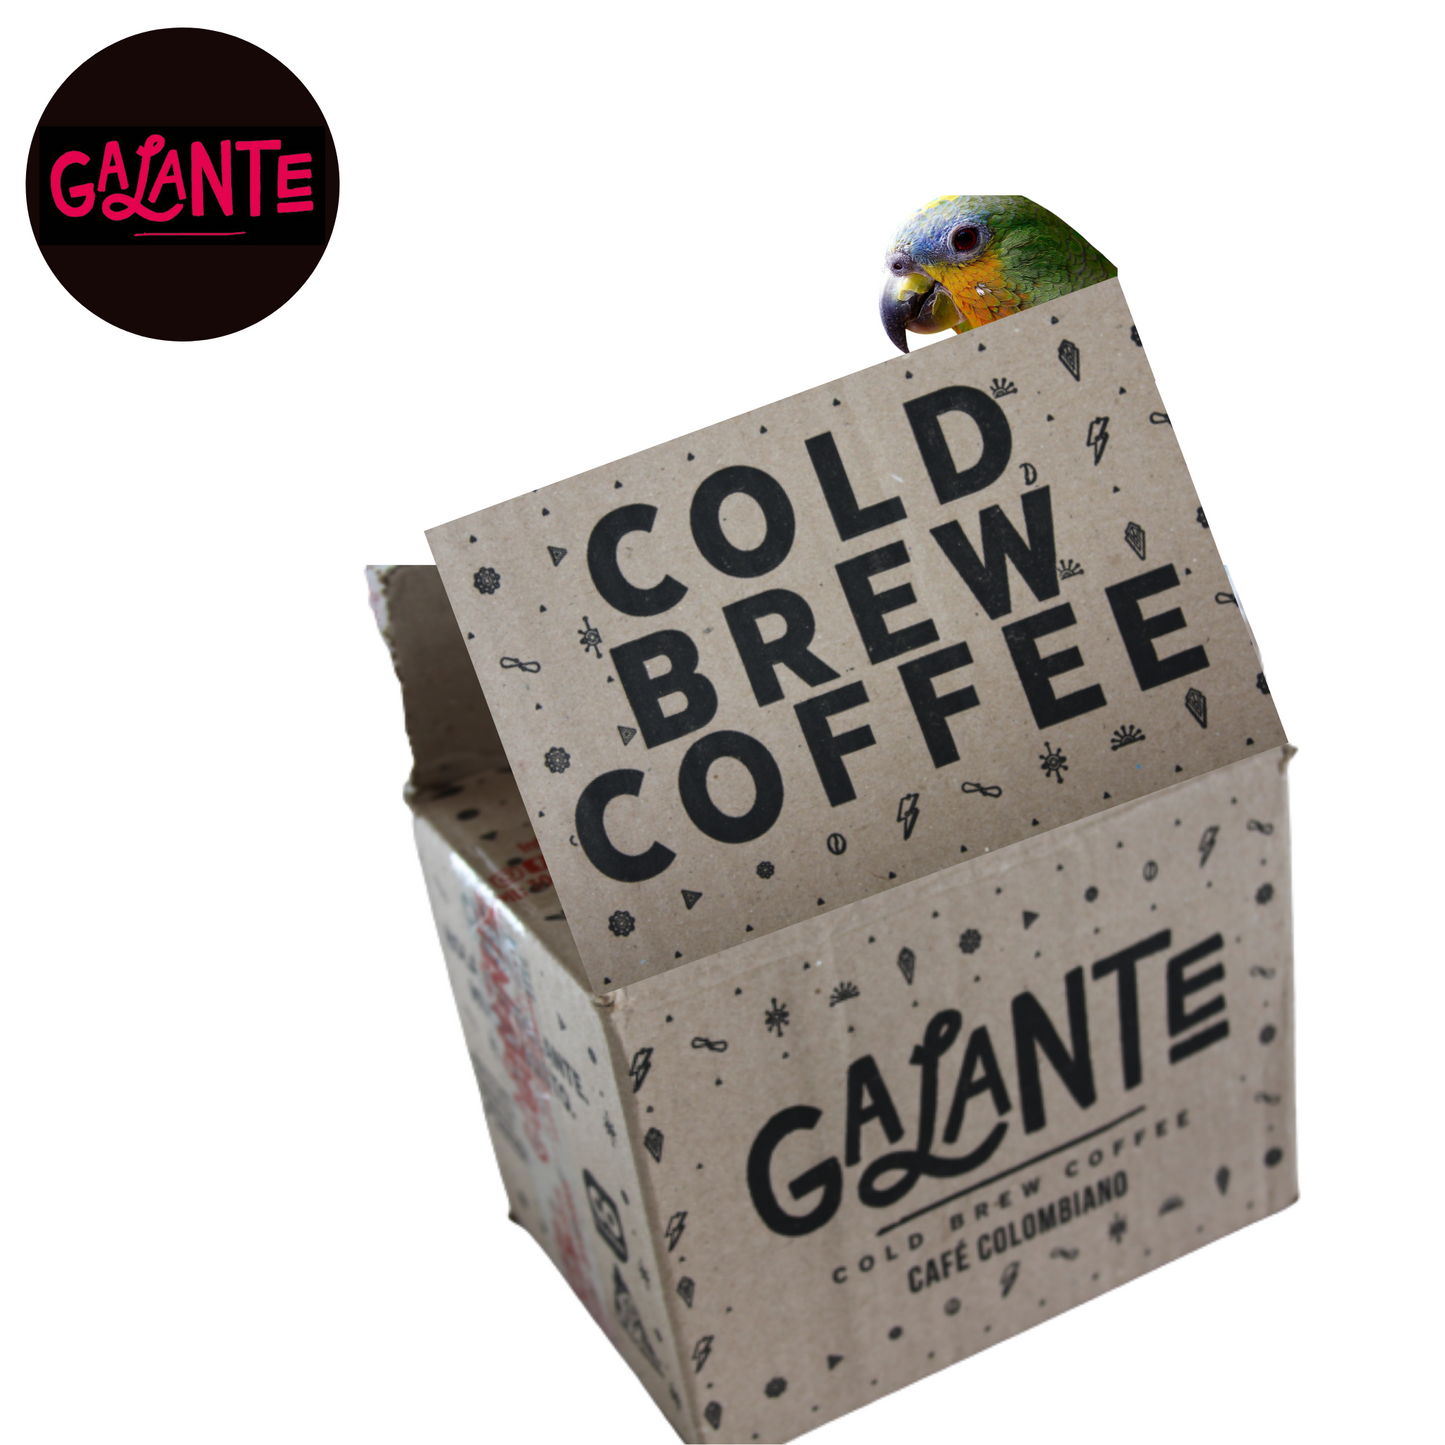 Galante Cold Brew Pack 6/12 units. Flavours: Chocolate, vainilla, Natural, unsweetened - 100% Colombian Coffee. Buy it here at Coffee Bean and Birds